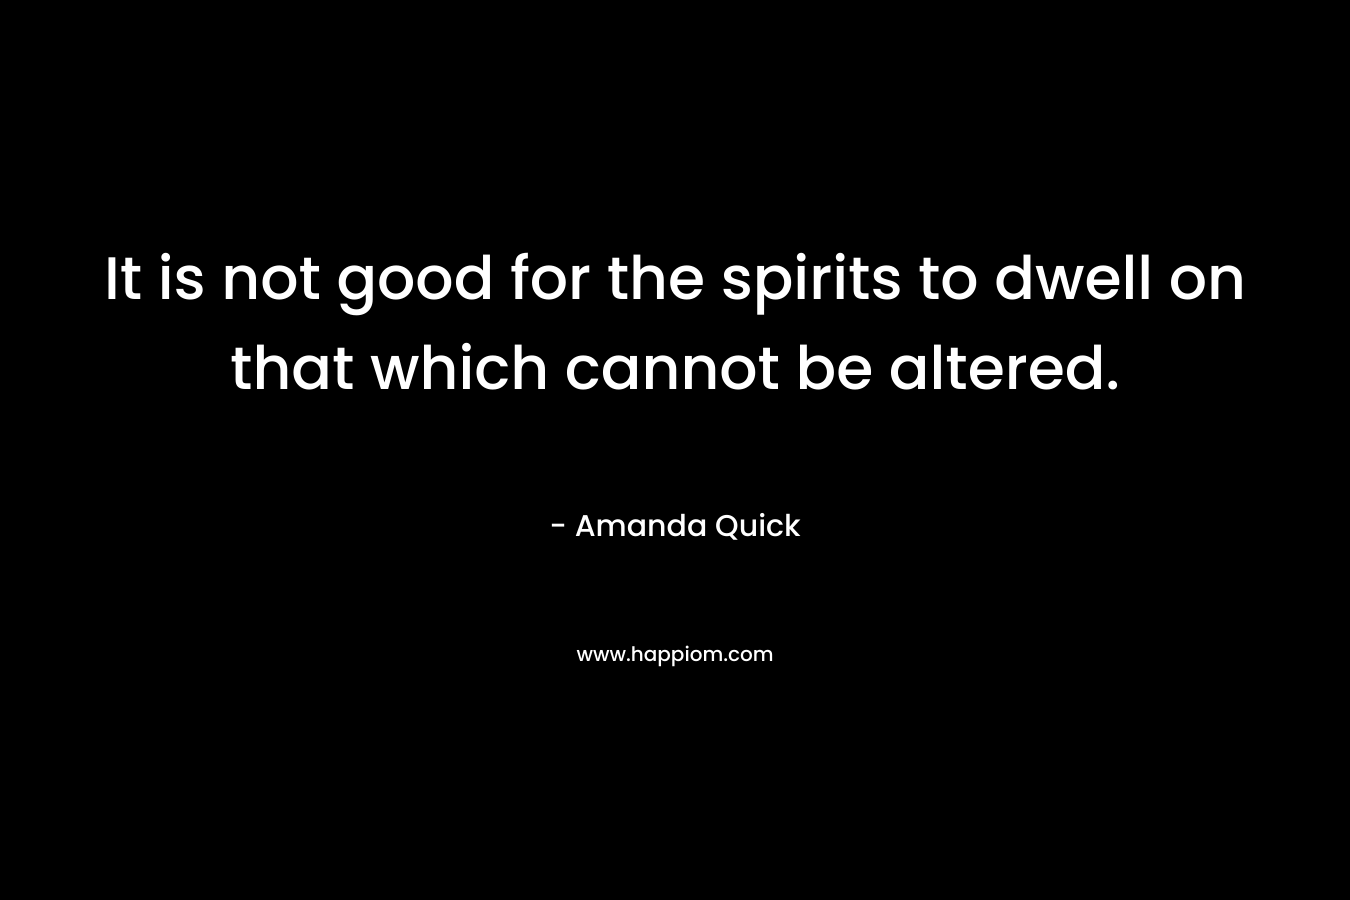 It is not good for the spirits to dwell on that which cannot be altered. – Amanda Quick